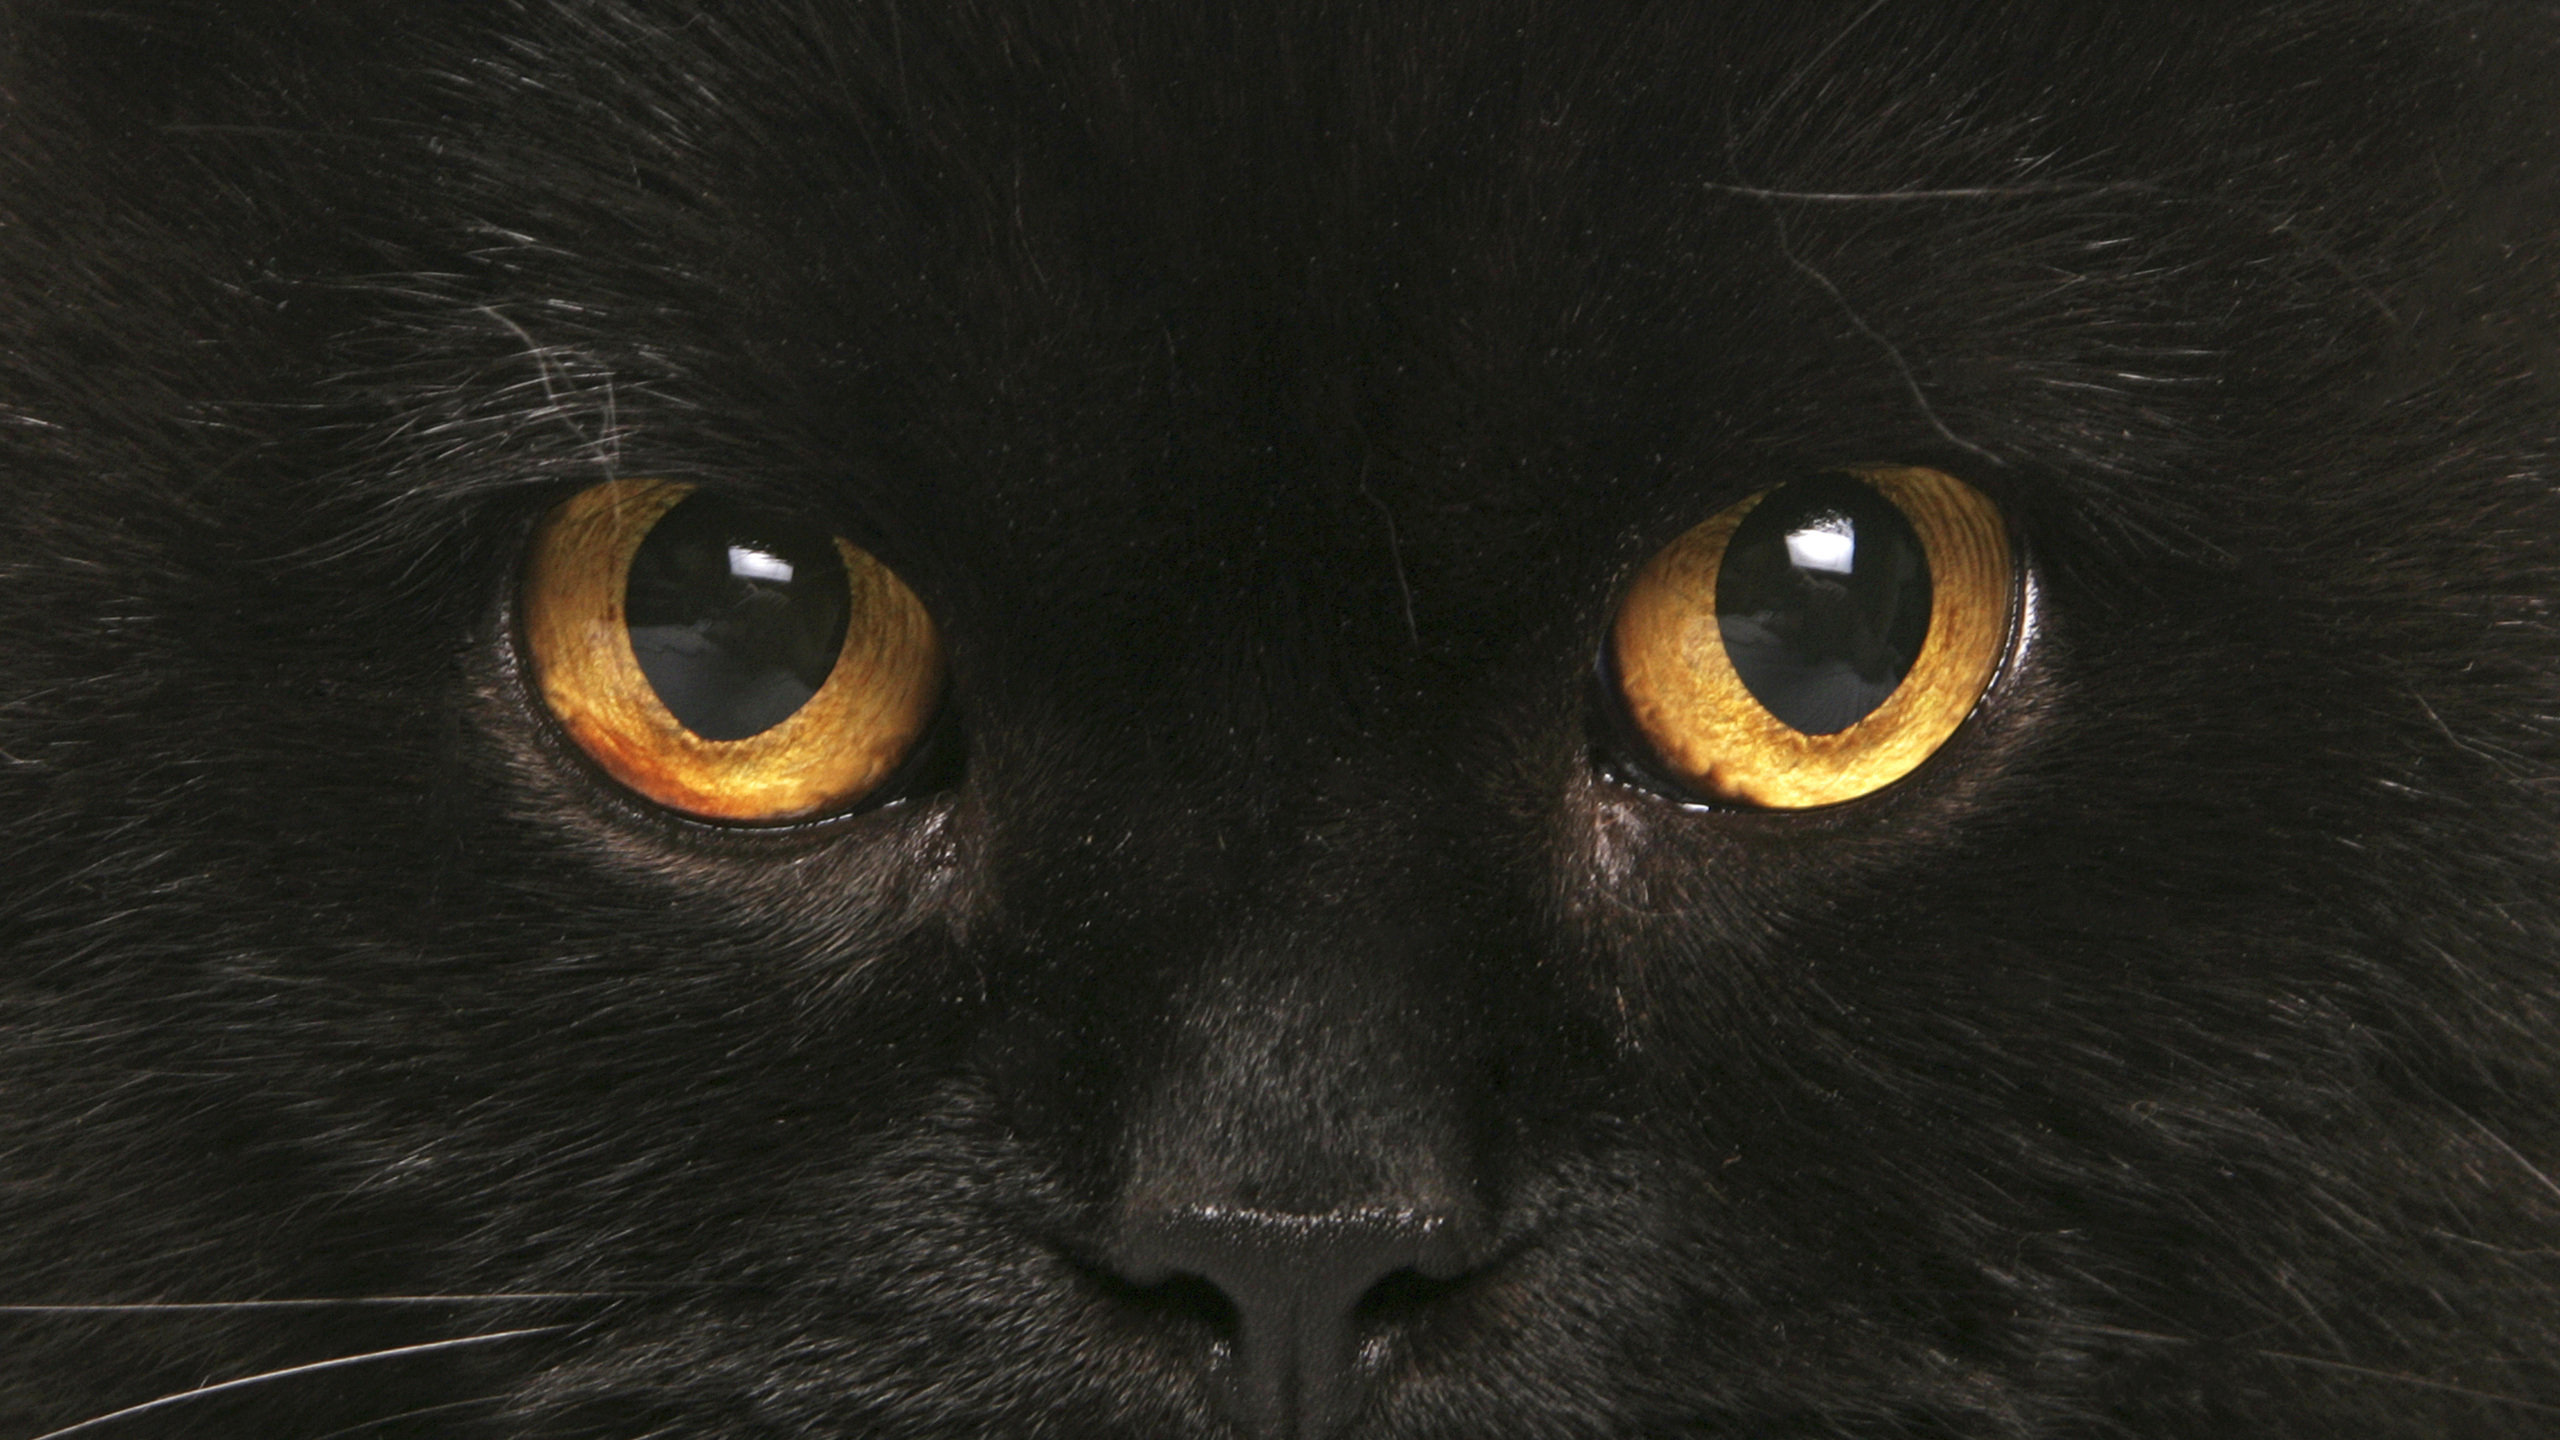  Cat s  Eyes  HD Wallpaper  Background Image 2560x1440 